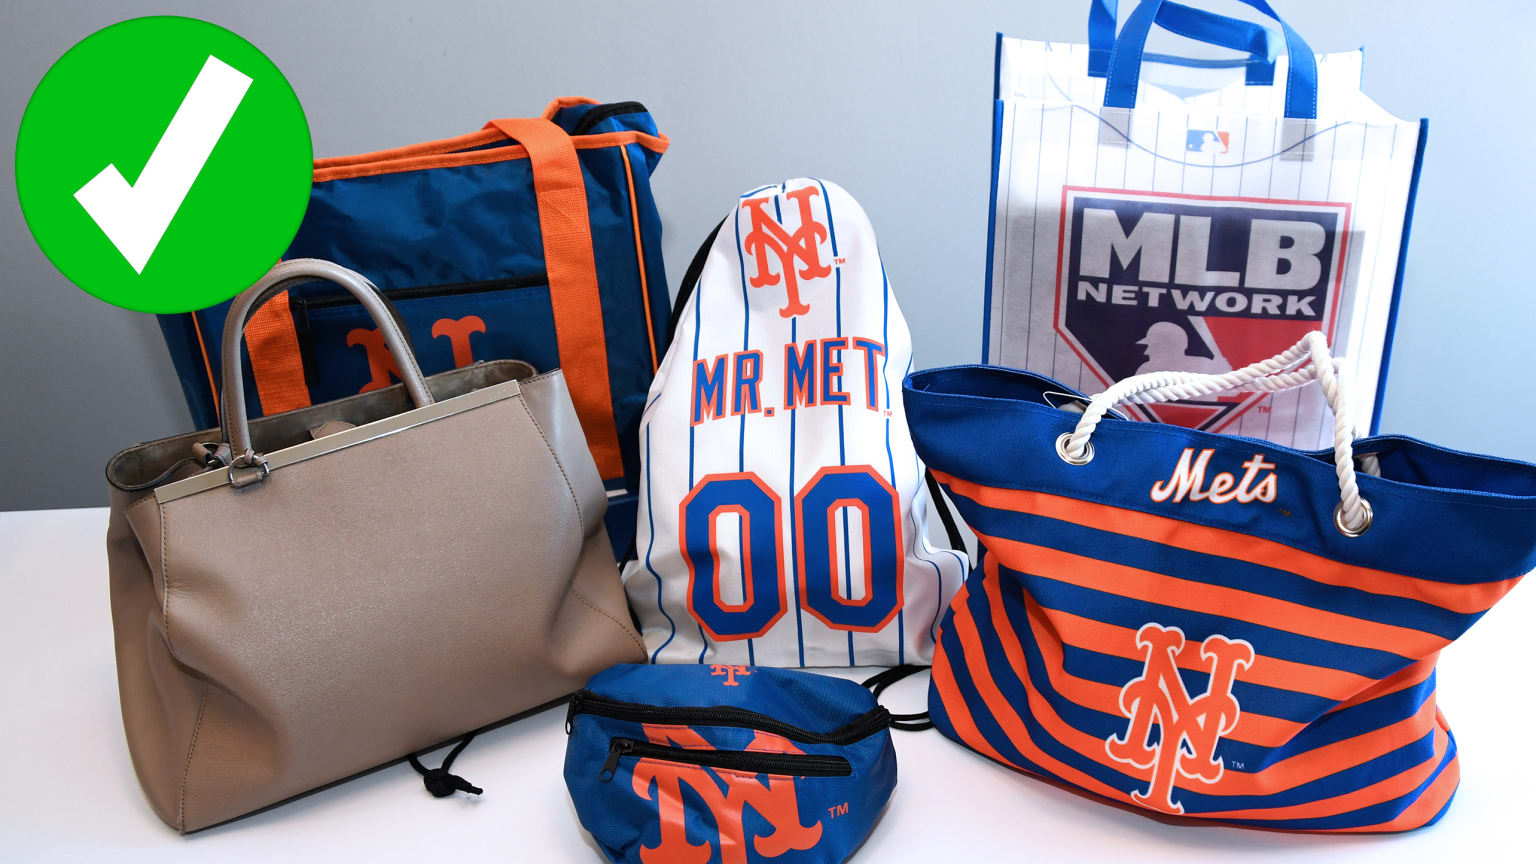 Guest post on the Citi Field backpack ban - The Mets Police